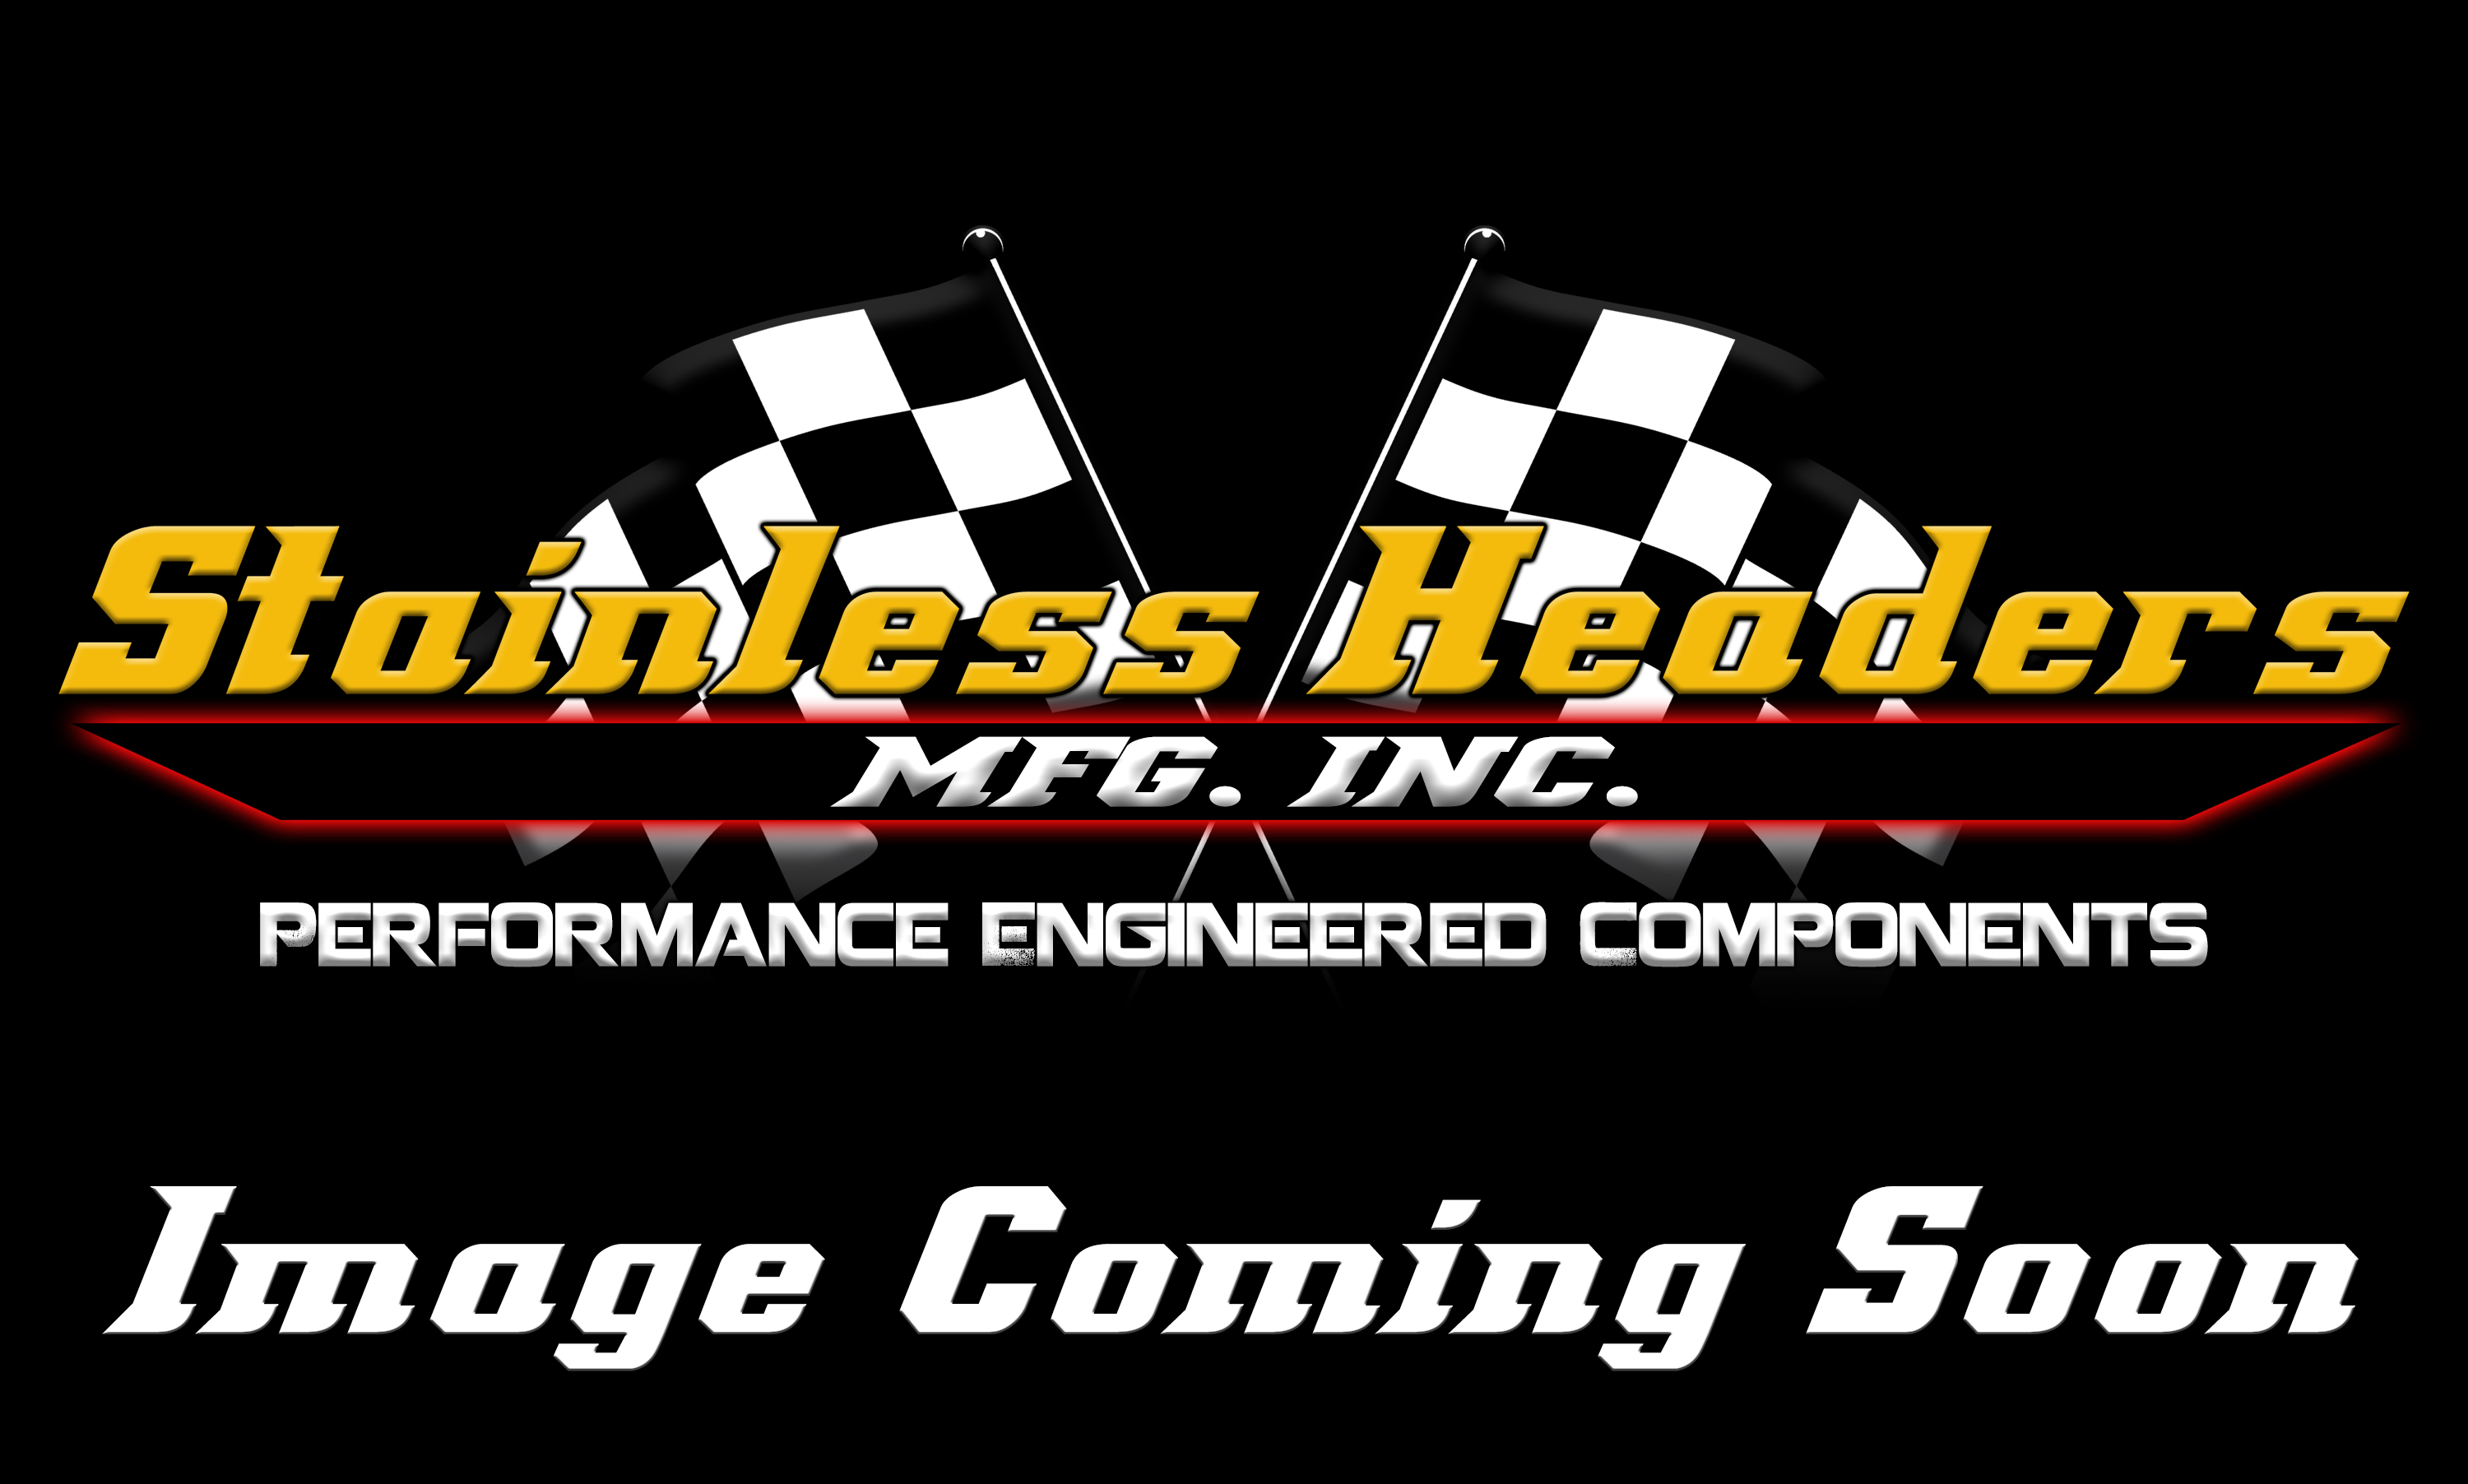 CompTurbo Technology Turbochargers - Comp Turbo Journal Bearing Turbochargers - CompTurbo Technologies - CTR3693S-6265 360 Journal Bearing Turbocharger (825 HP)